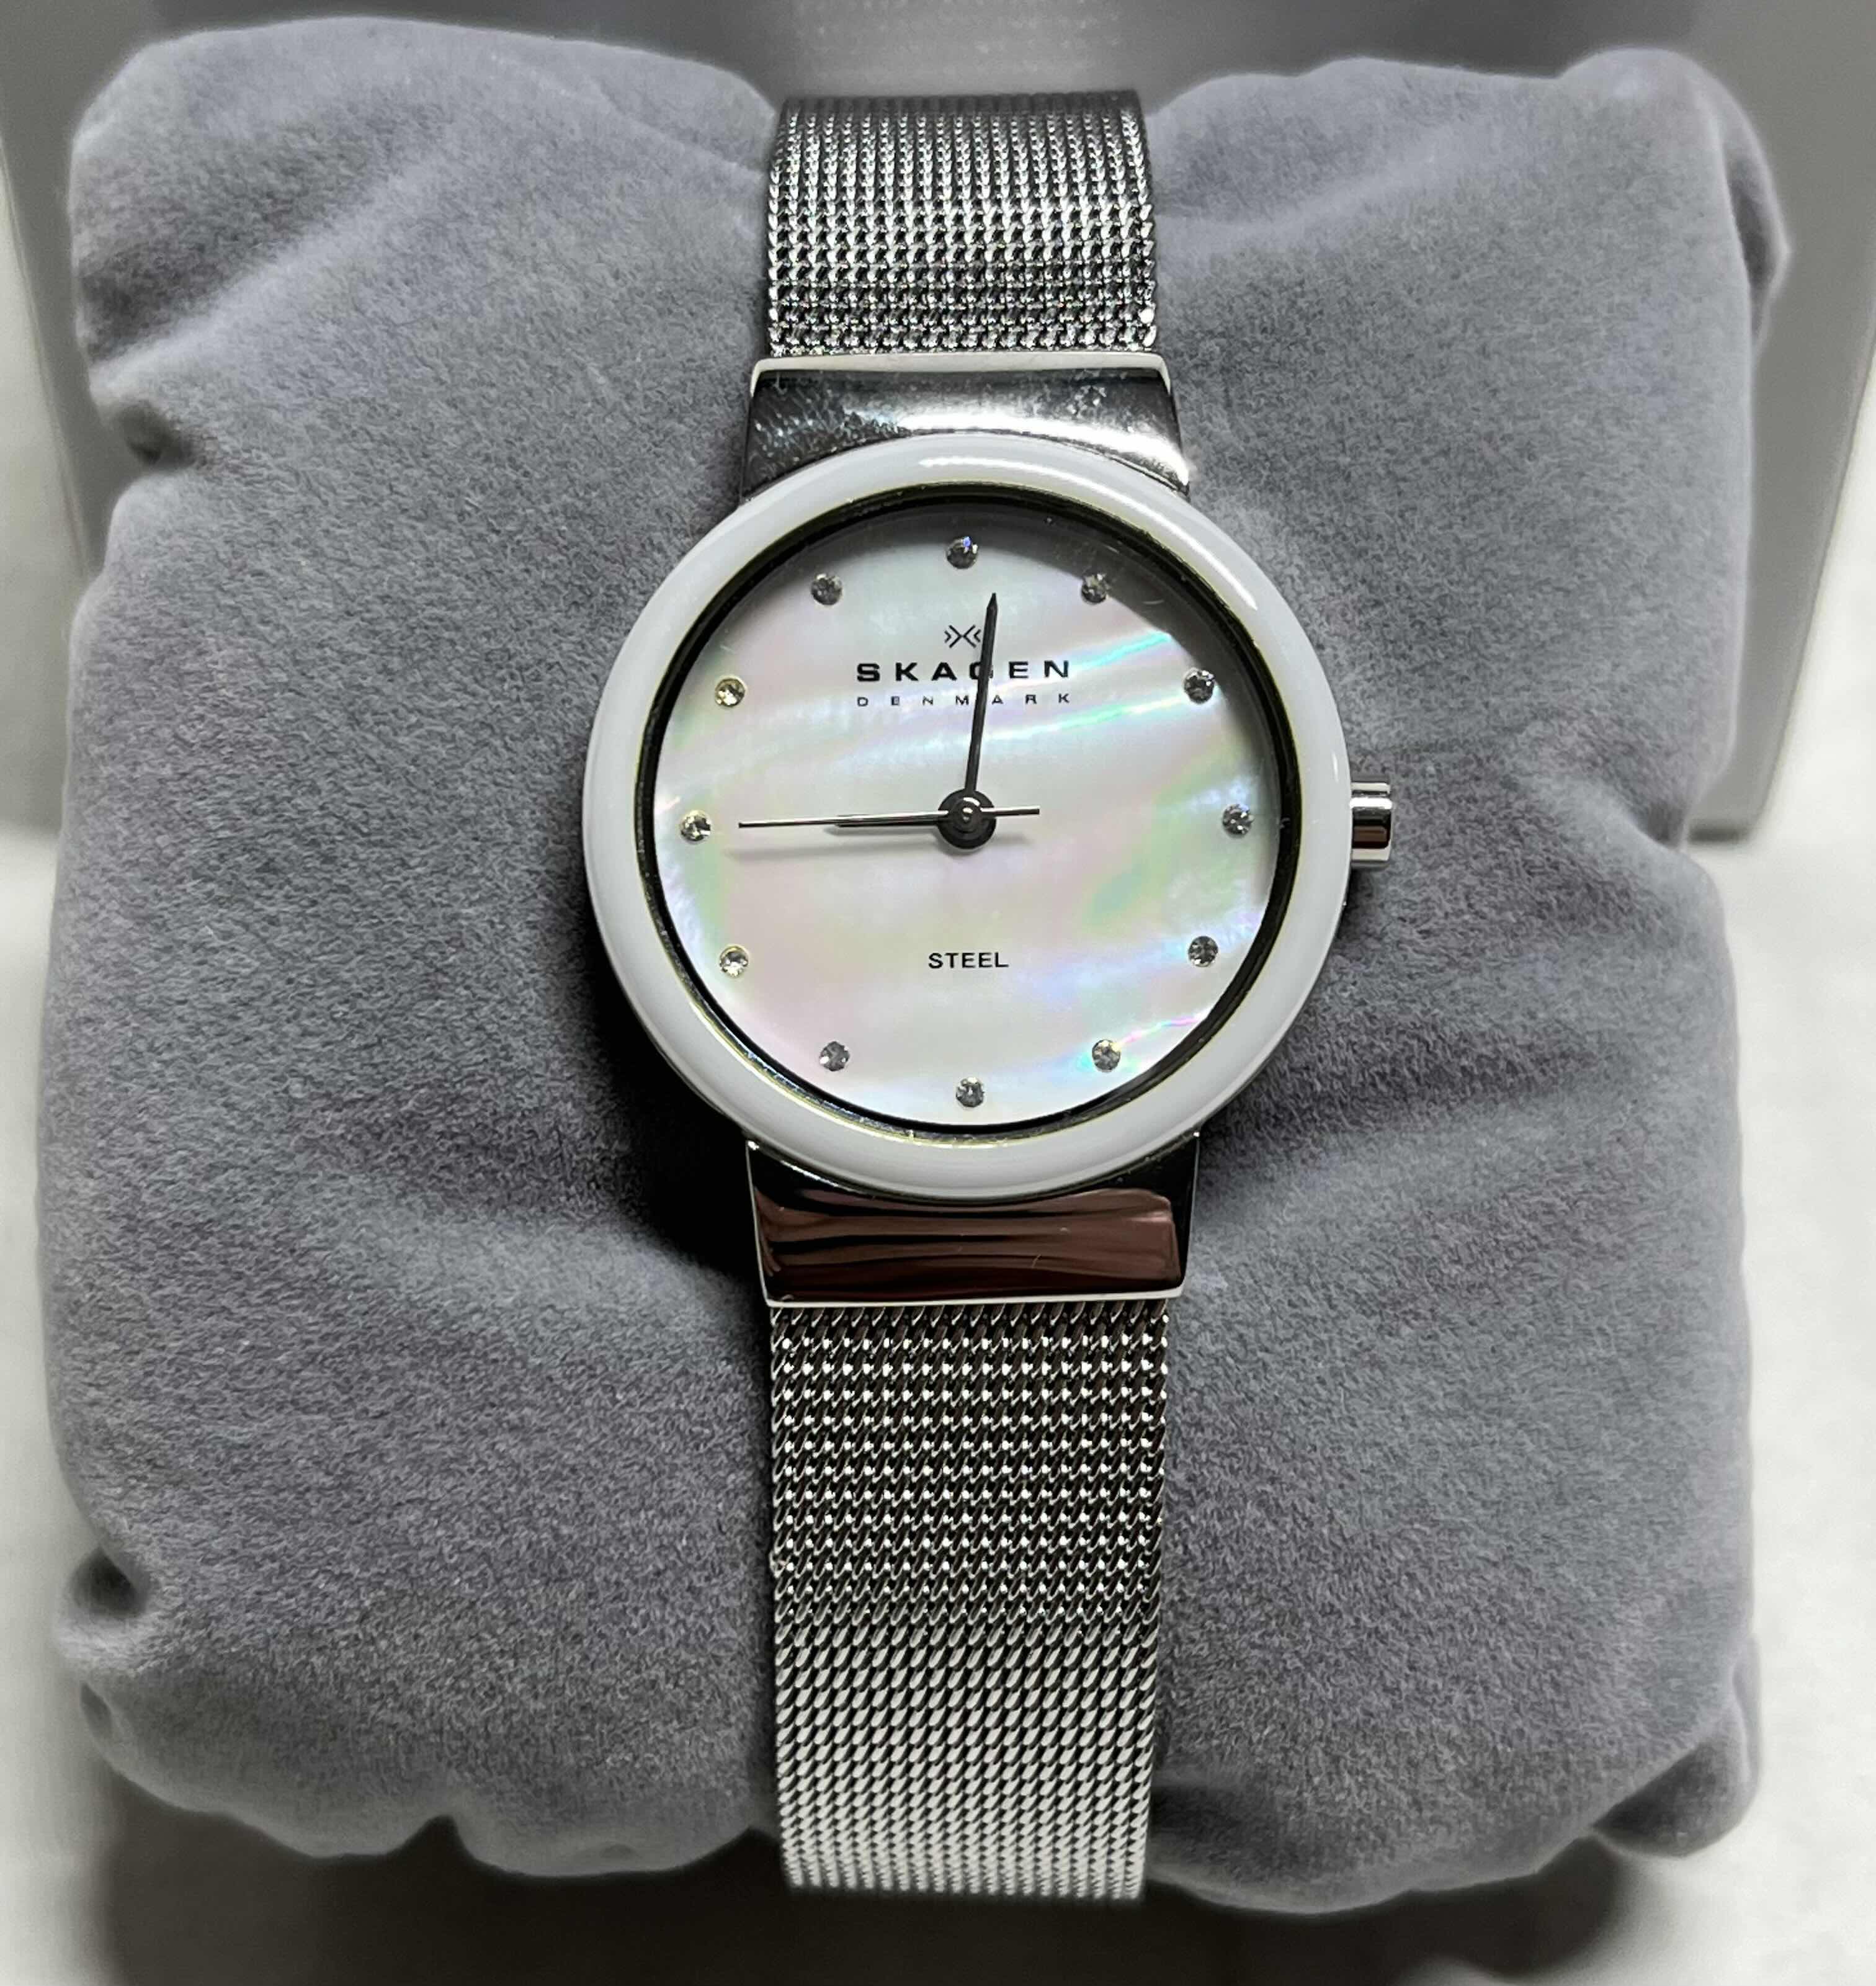 Photo 1 of SKAGEN DENMARK WOMENS ANALOG WATCH W STAINLESS STEEL CASE & MESH BAND, MOTHER OF PEARL INLAY & SWAROVSKI CRYSTALS MODEL 458SSSW